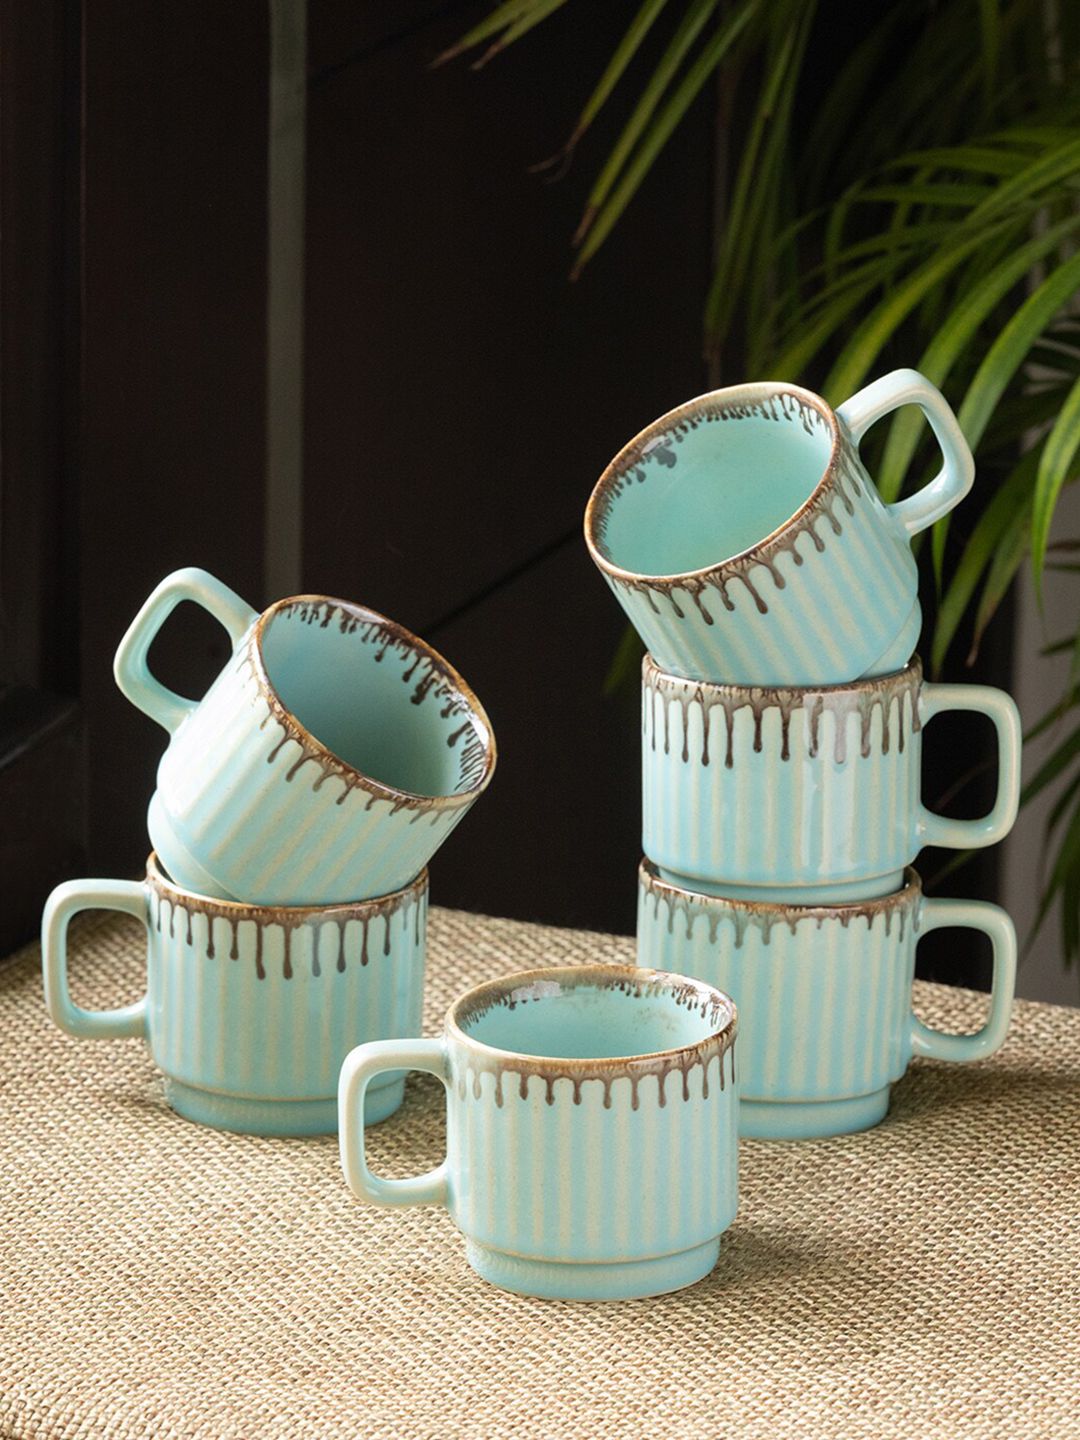 ExclusiveLane Teal & Brown Printed Ceramic Glossy Cups Set of Cups and Mugs Price in India